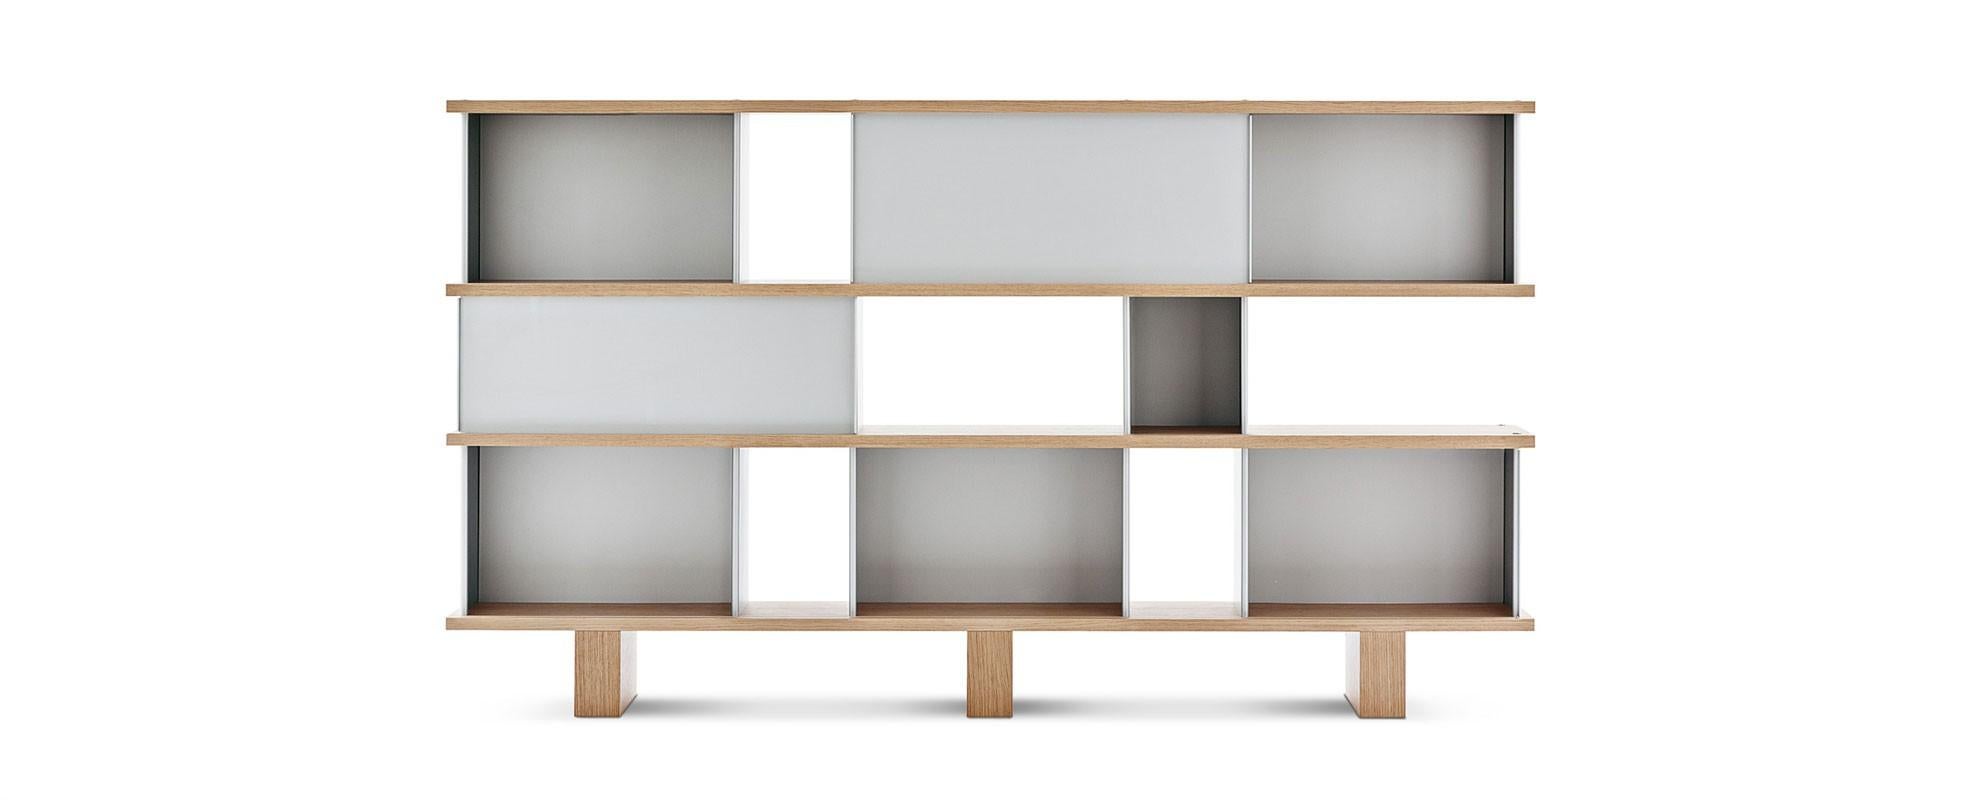 Mid-Century Modern Charlotte Perriand Nuage Shelving Unit, Wood and Aluminium by Cassina